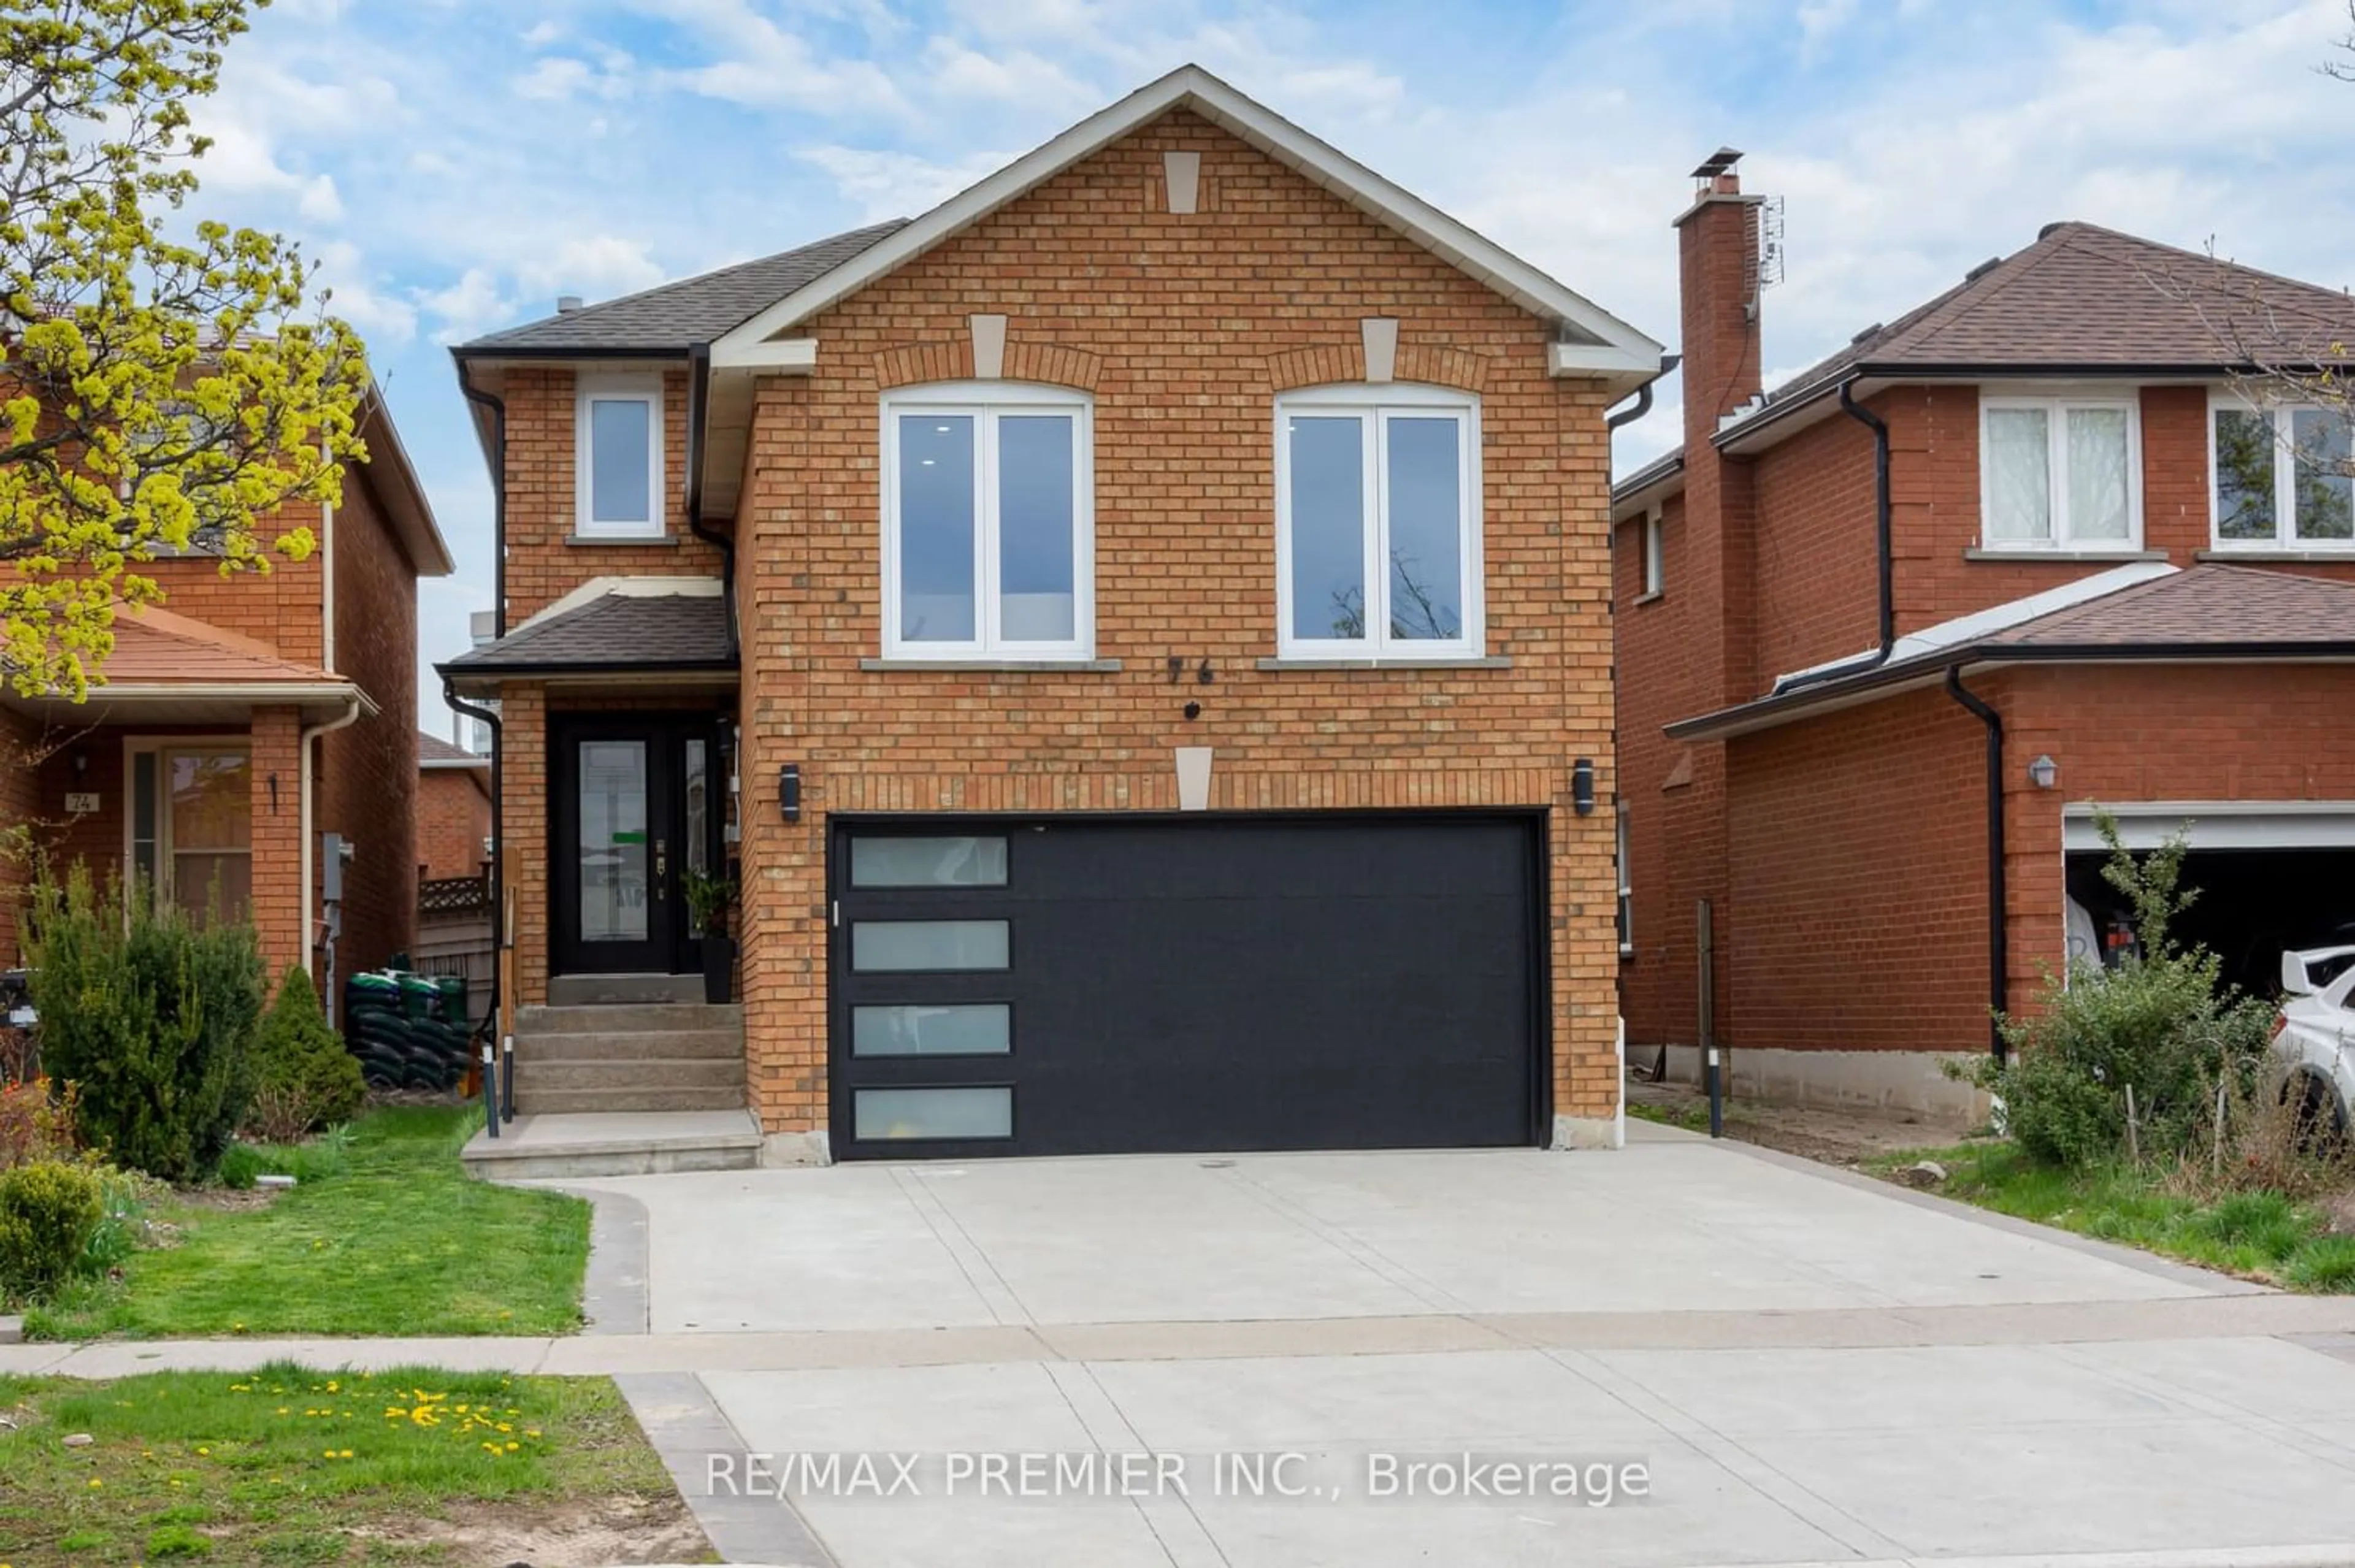 Home with brick exterior material for 76 Windmill Blvd, Brampton Ontario L6Y 3T2